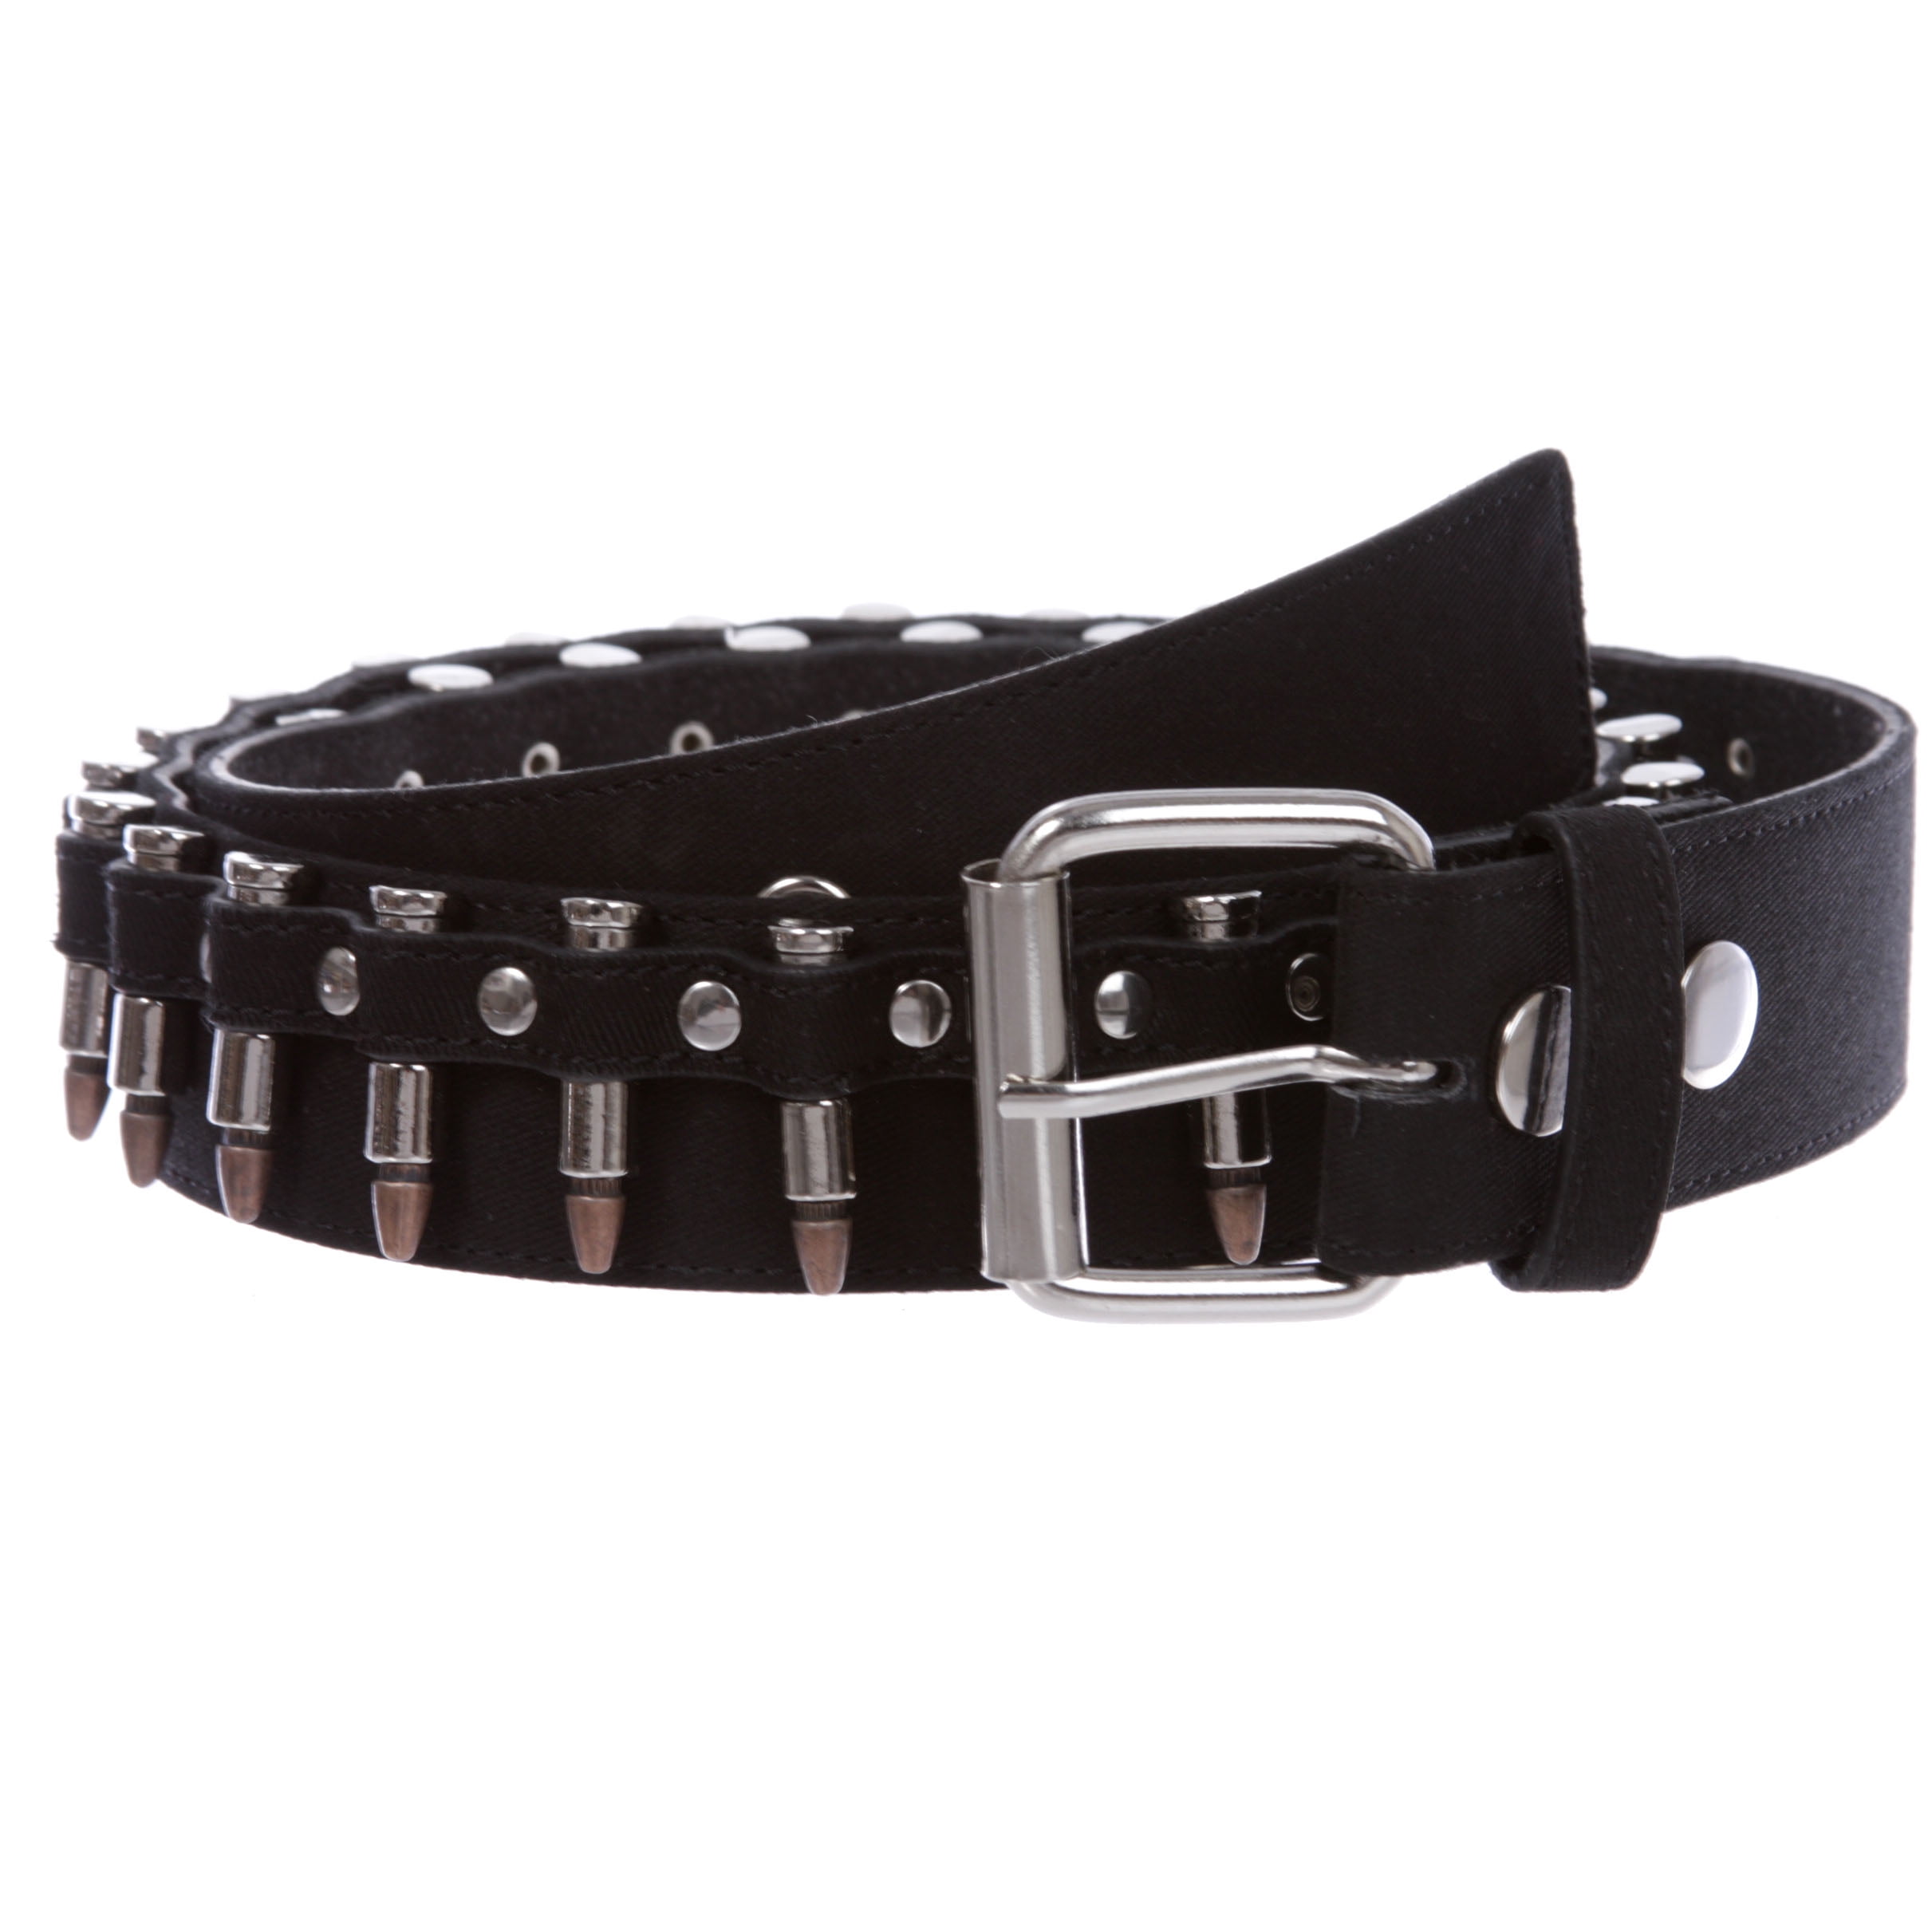 Hollow Bullet Decoration Belt Fashion Ladies Leather Studded Gift